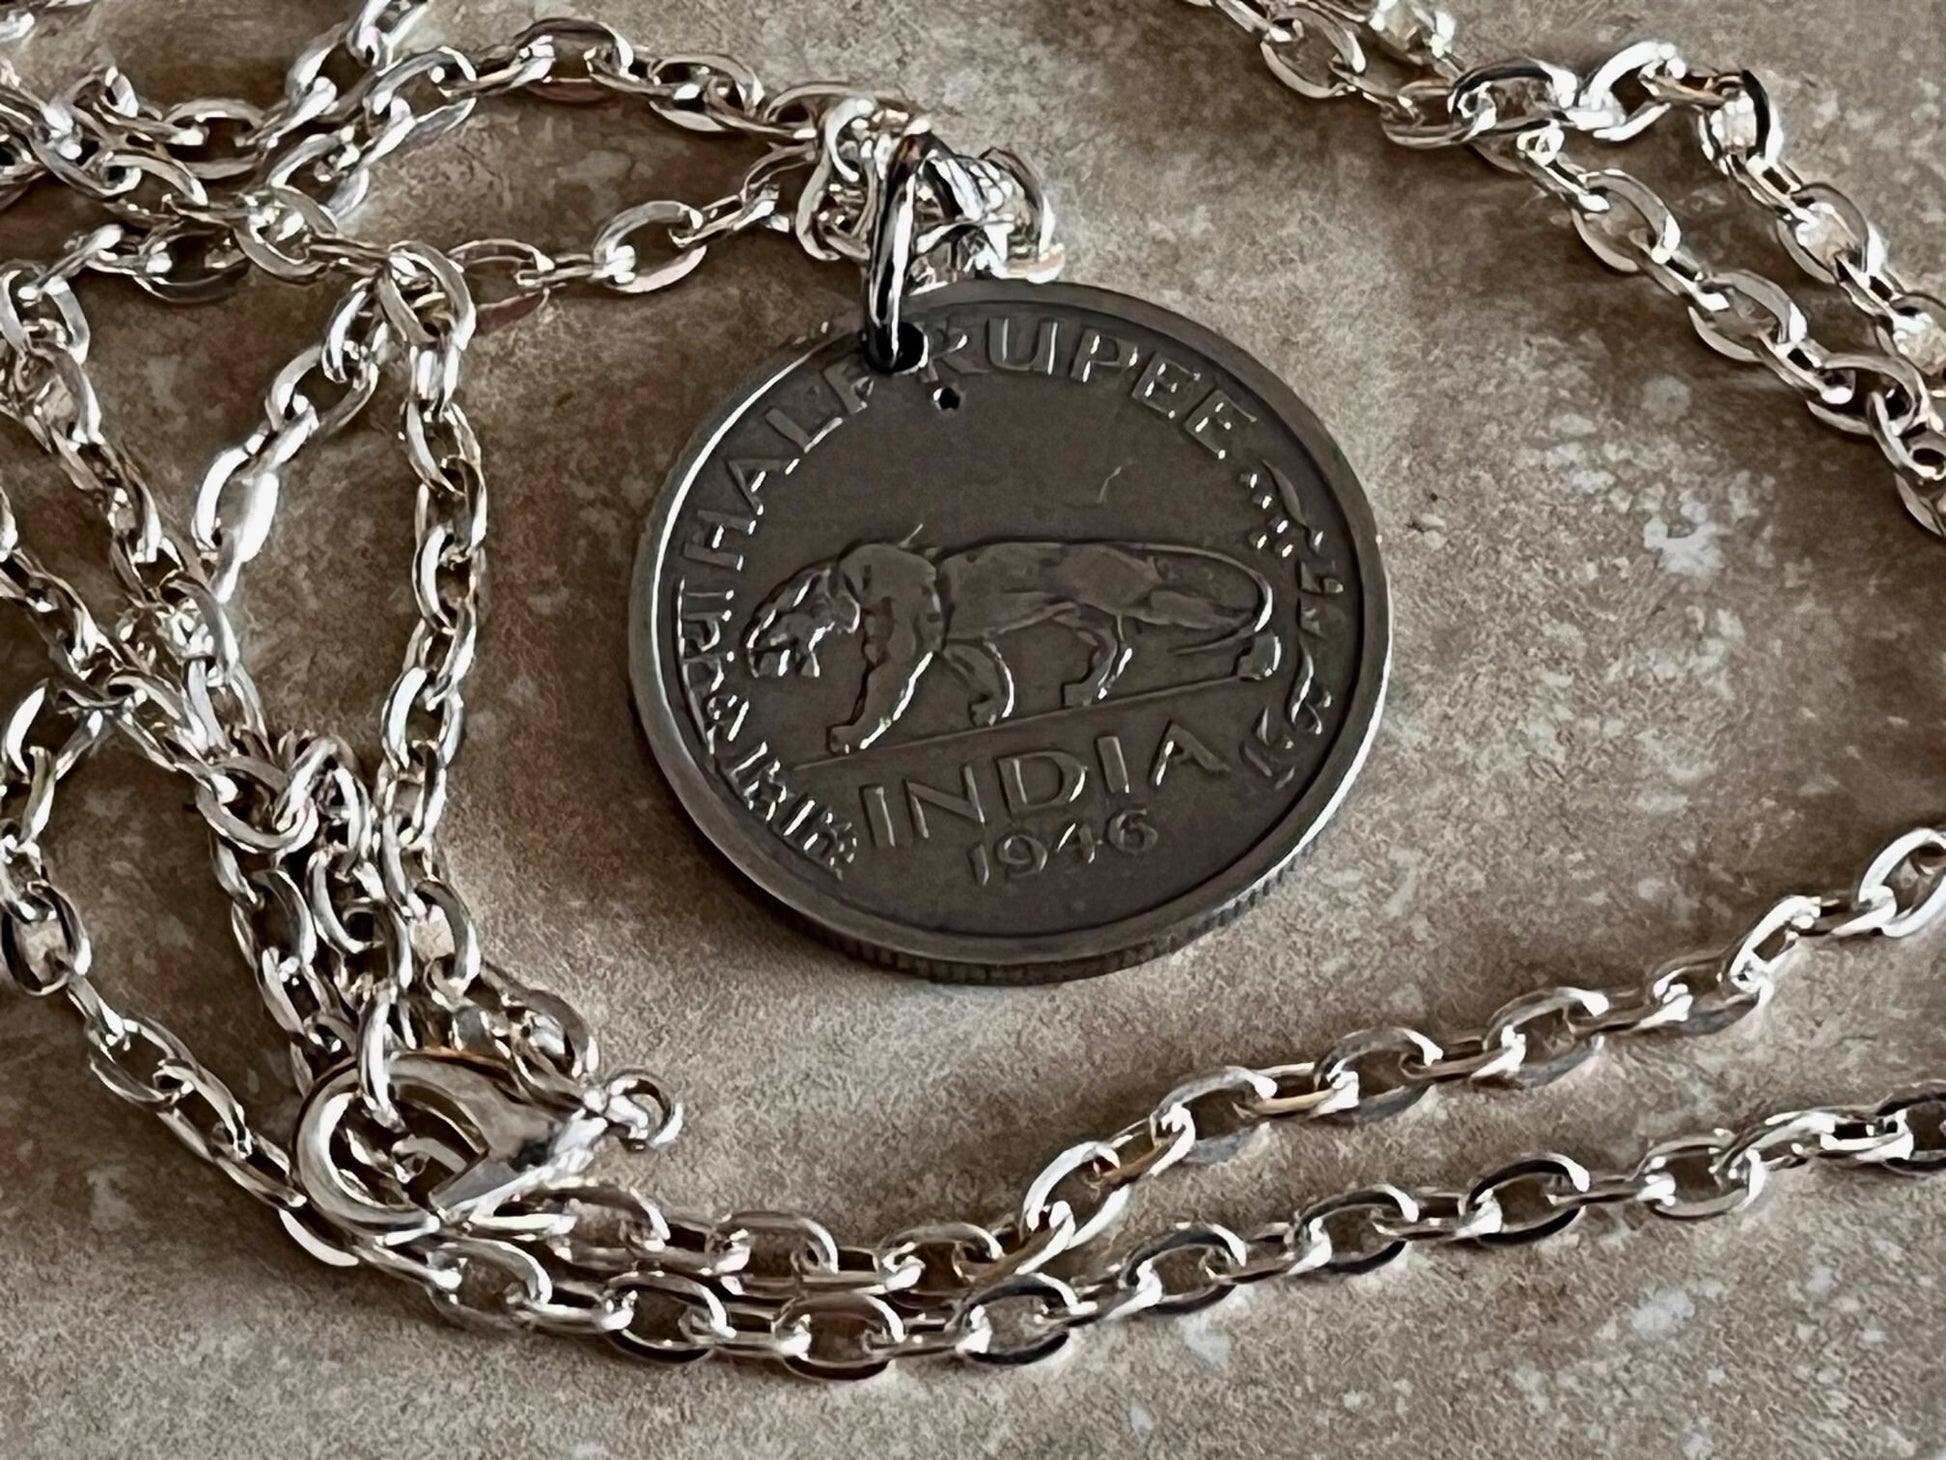 India Coin Necklace Half Rupee Pendant Vintage Personal Necklace Vintage Handmade Jewelry Gift Friend Charm For Him Her World Coin Collector